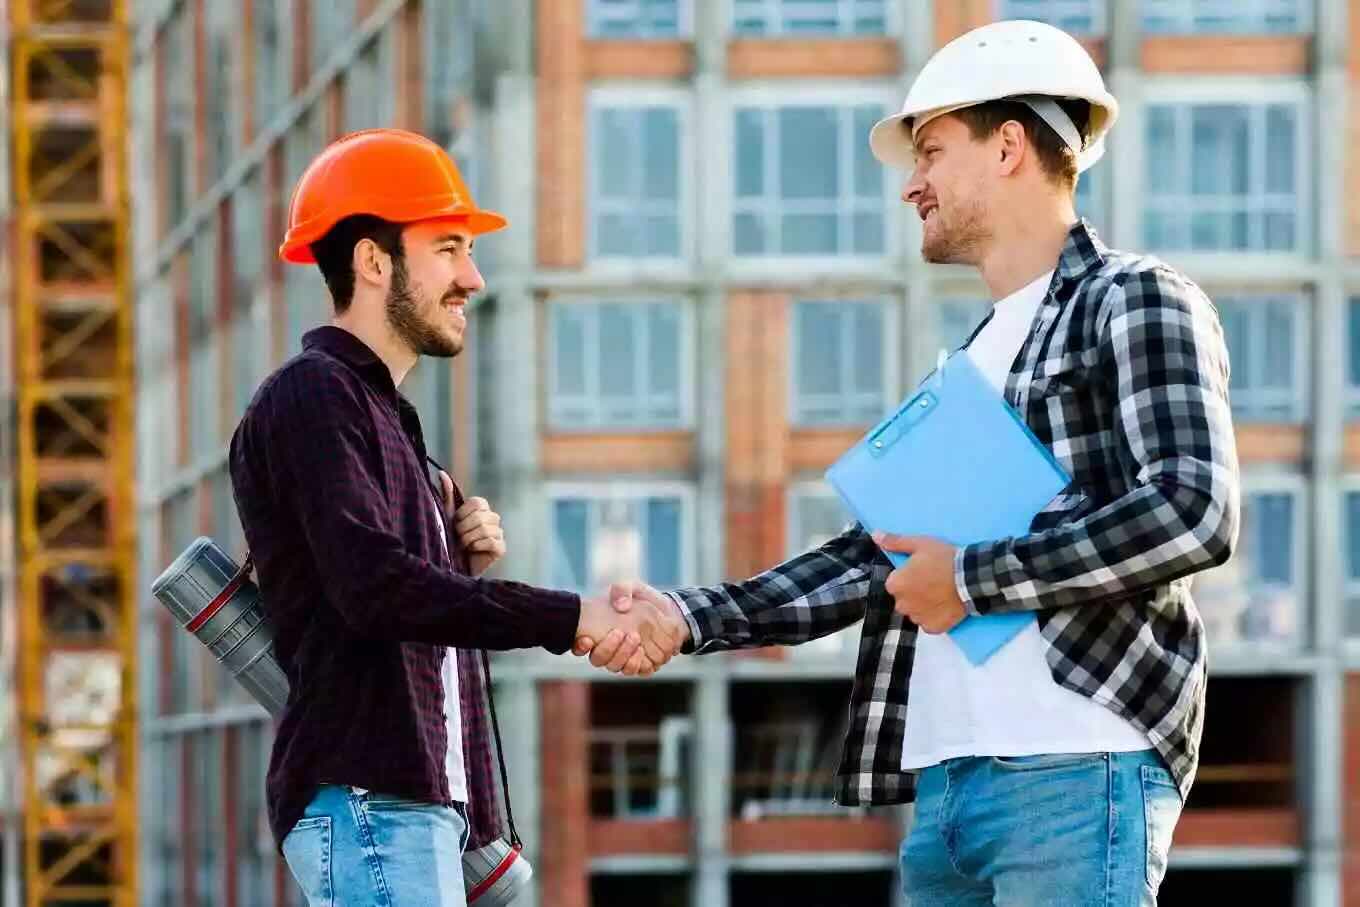 How To Get Leads For Construction Business